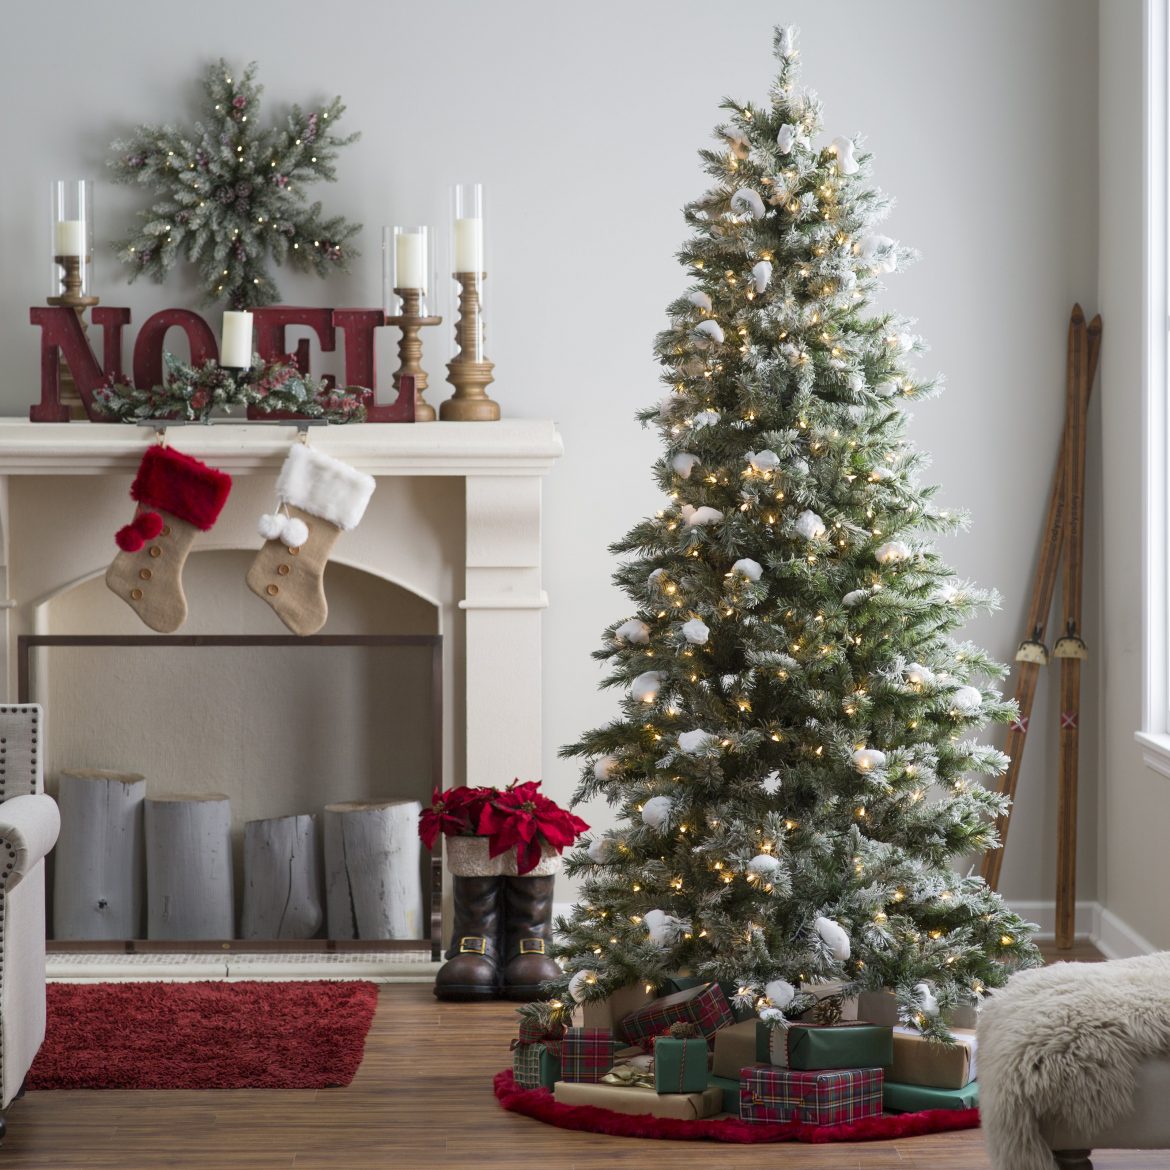 10 Steps To A Perfect Christmas Tree - Decorating Tips and Ideas - The